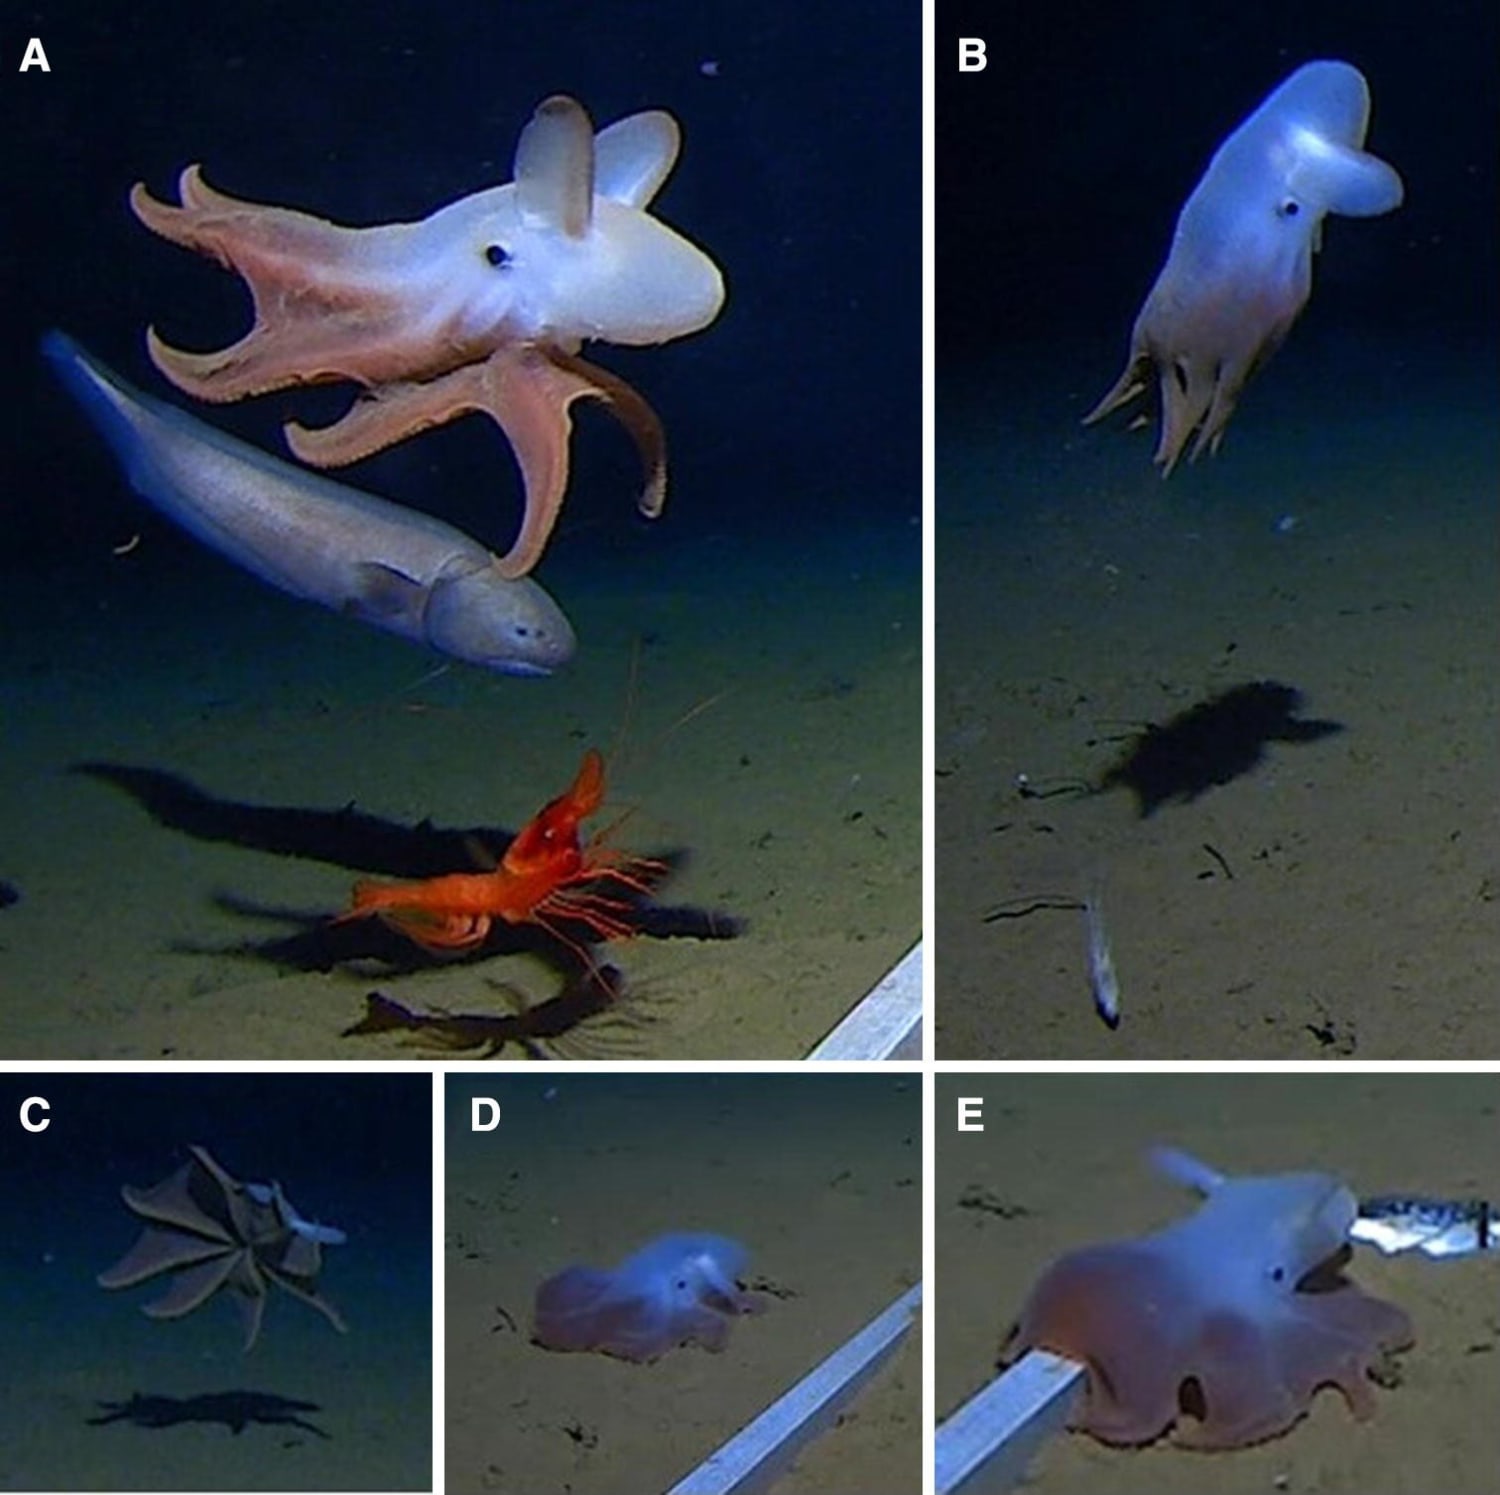 Footage captured of cephalopod at deepest ocean level ever observed